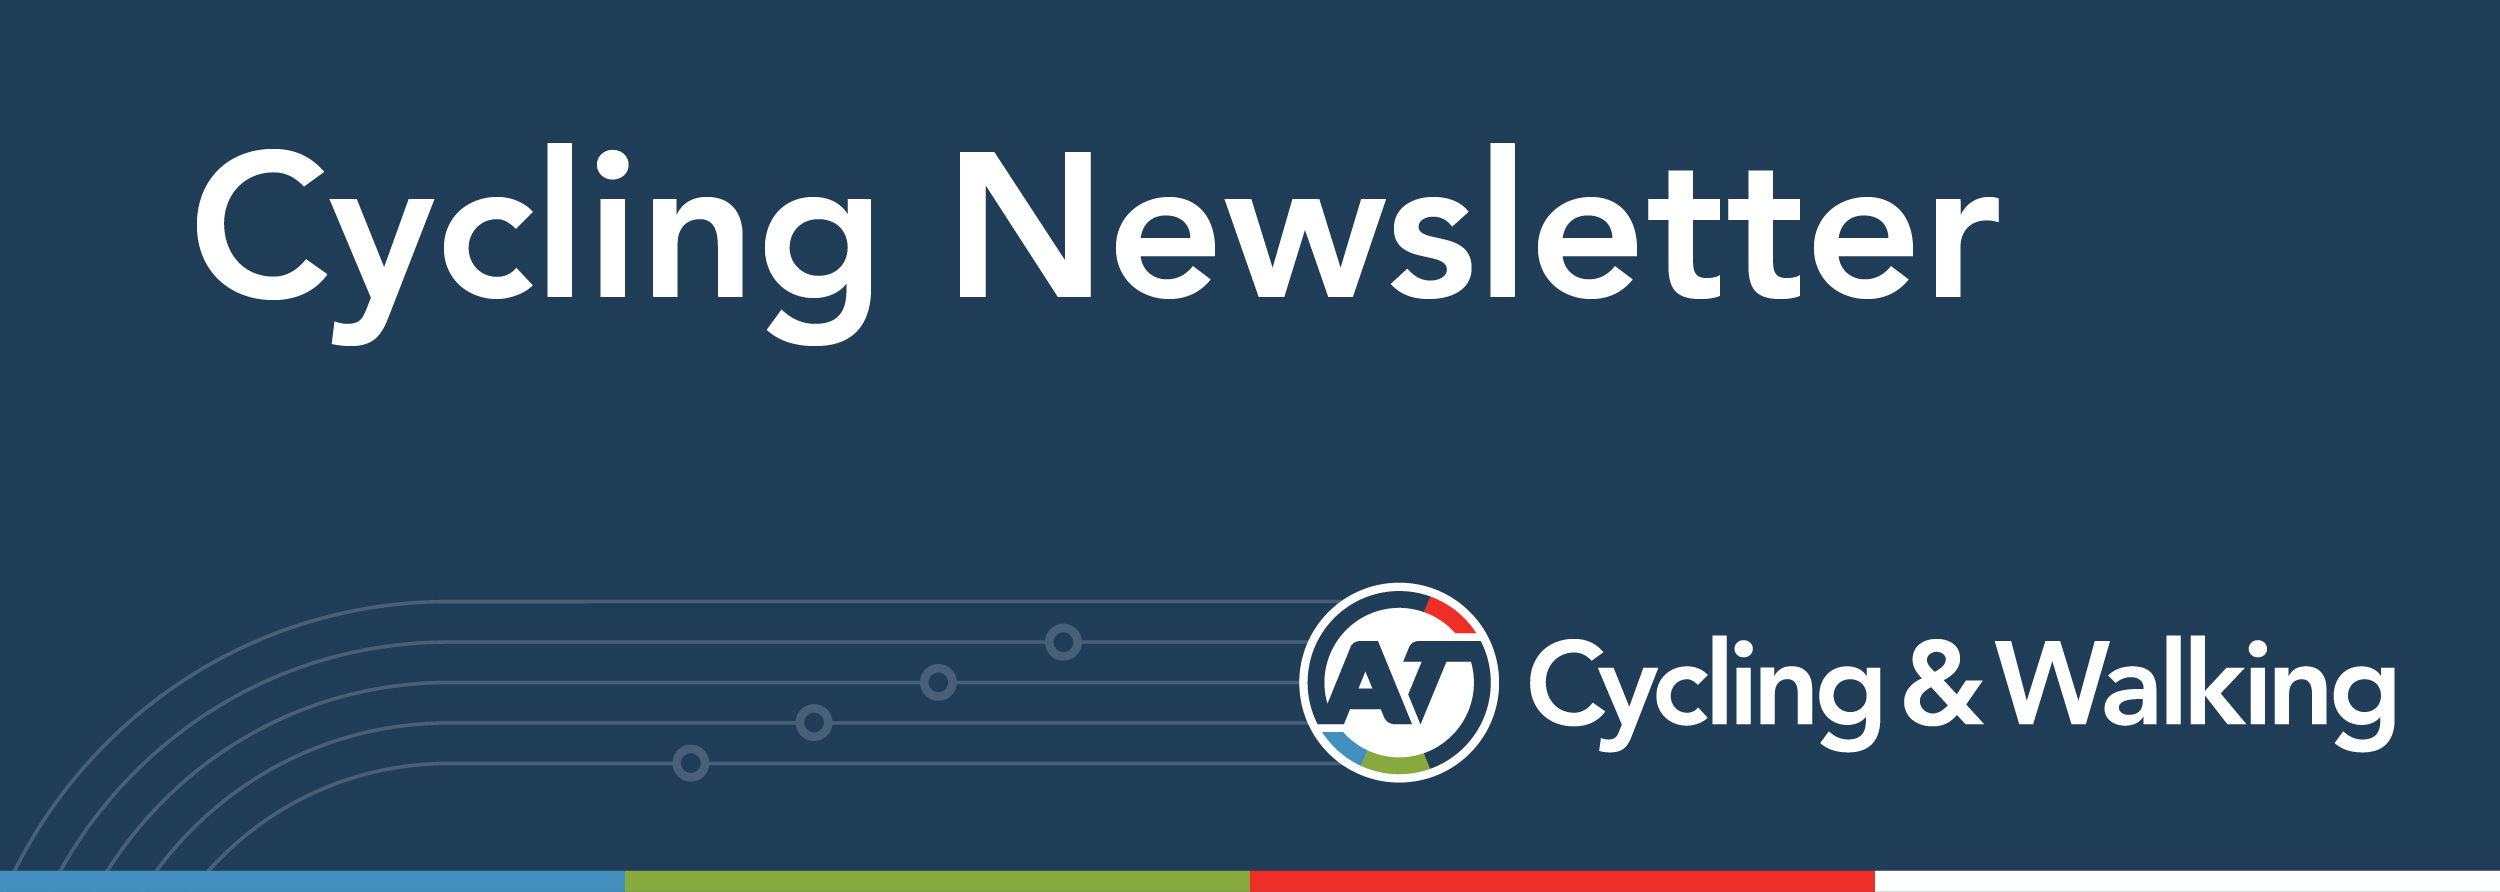 Cycling Newsletter 